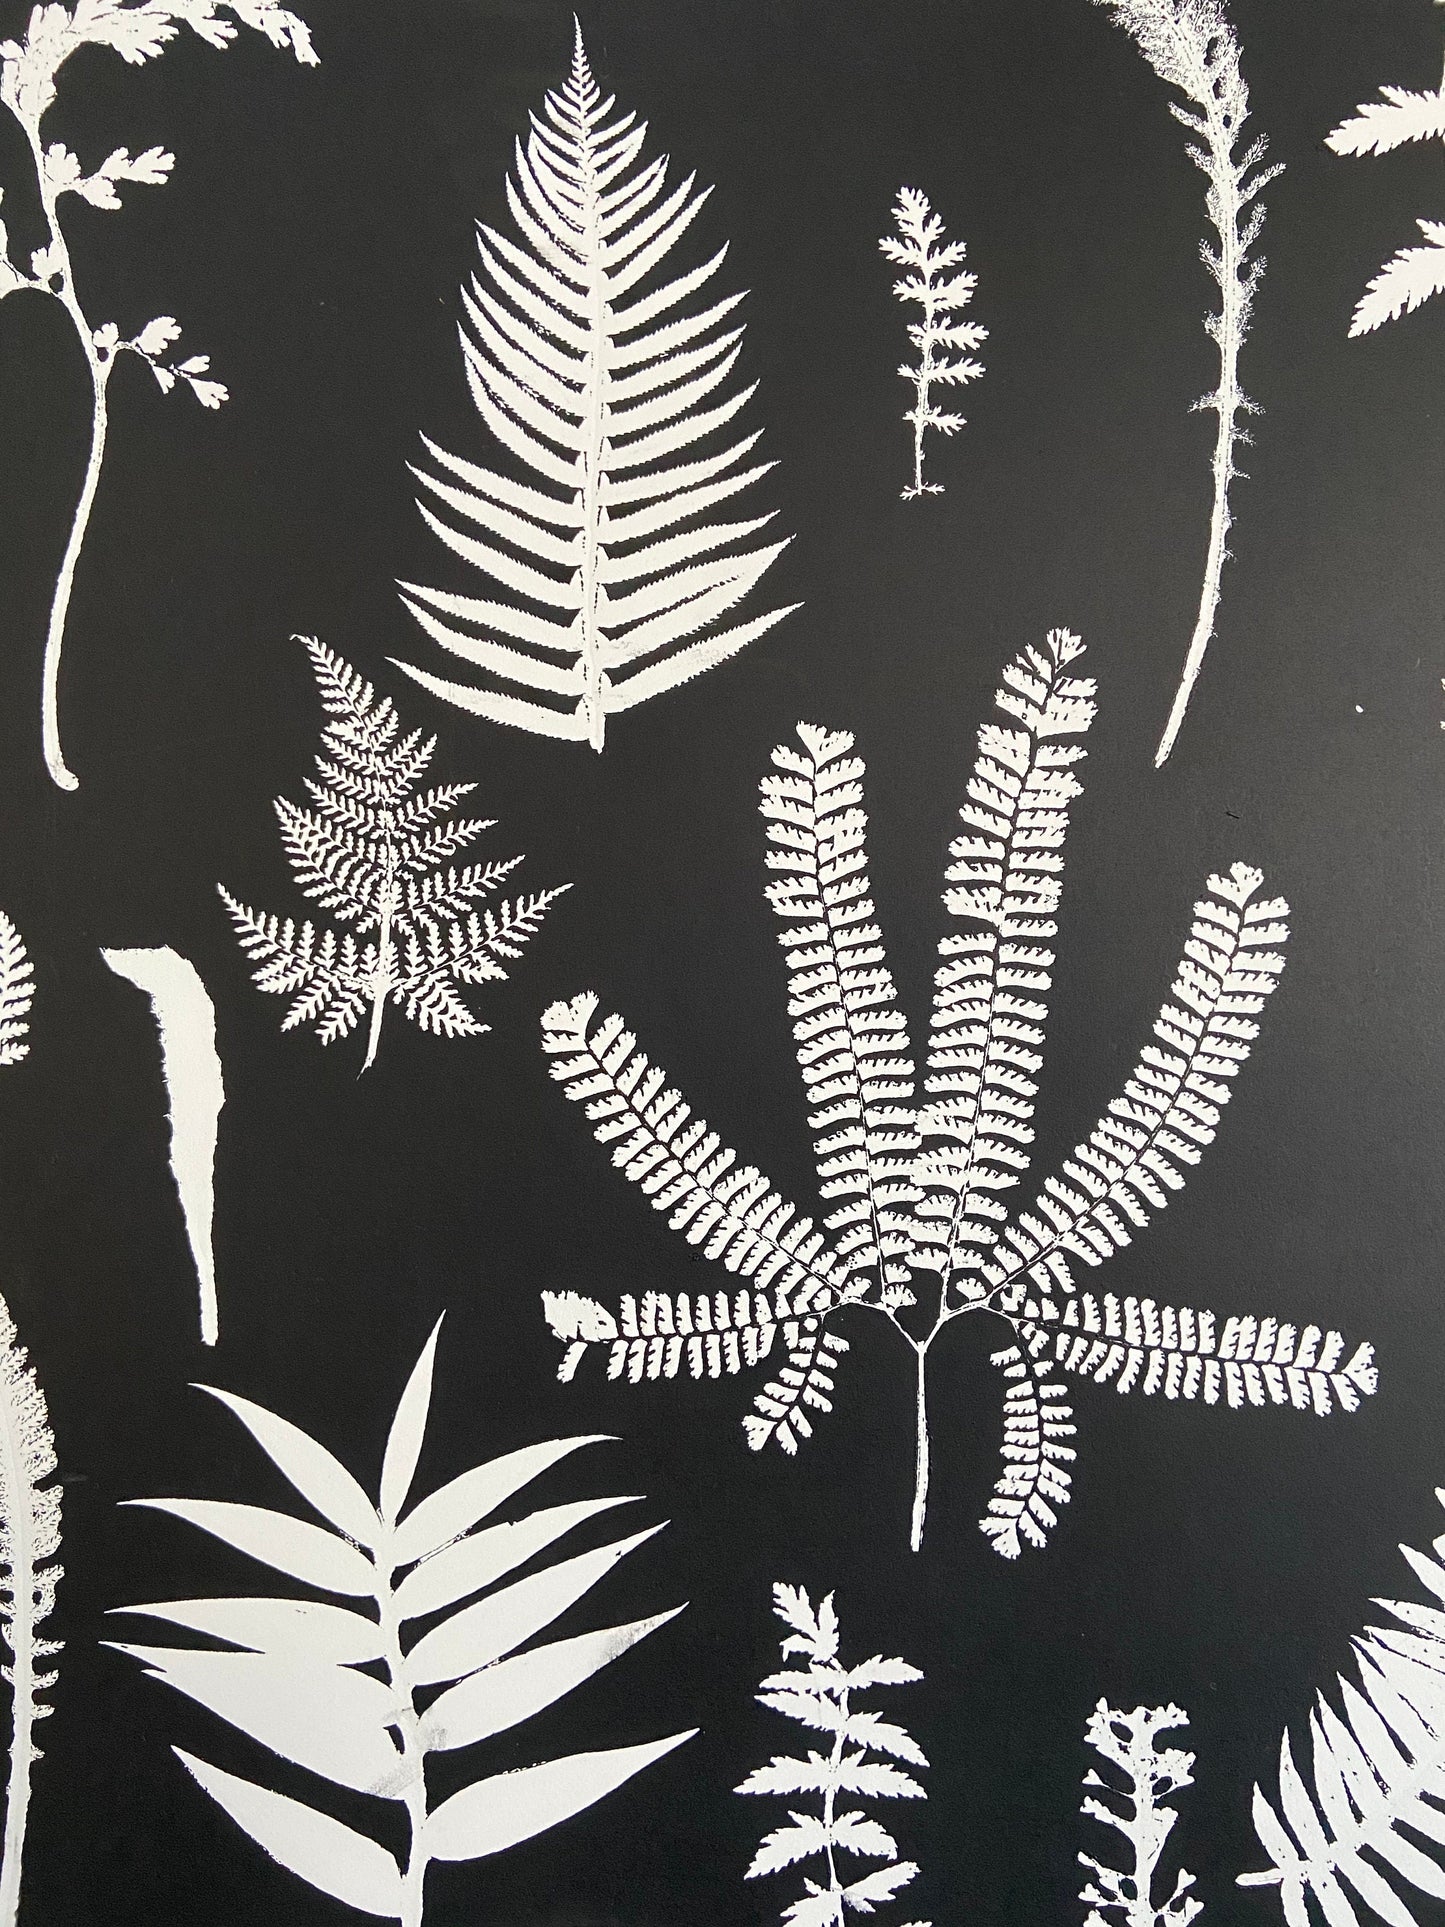 Ferns and Leaves Collage II Hand Pressed Monoprint - 24x36 giclee print